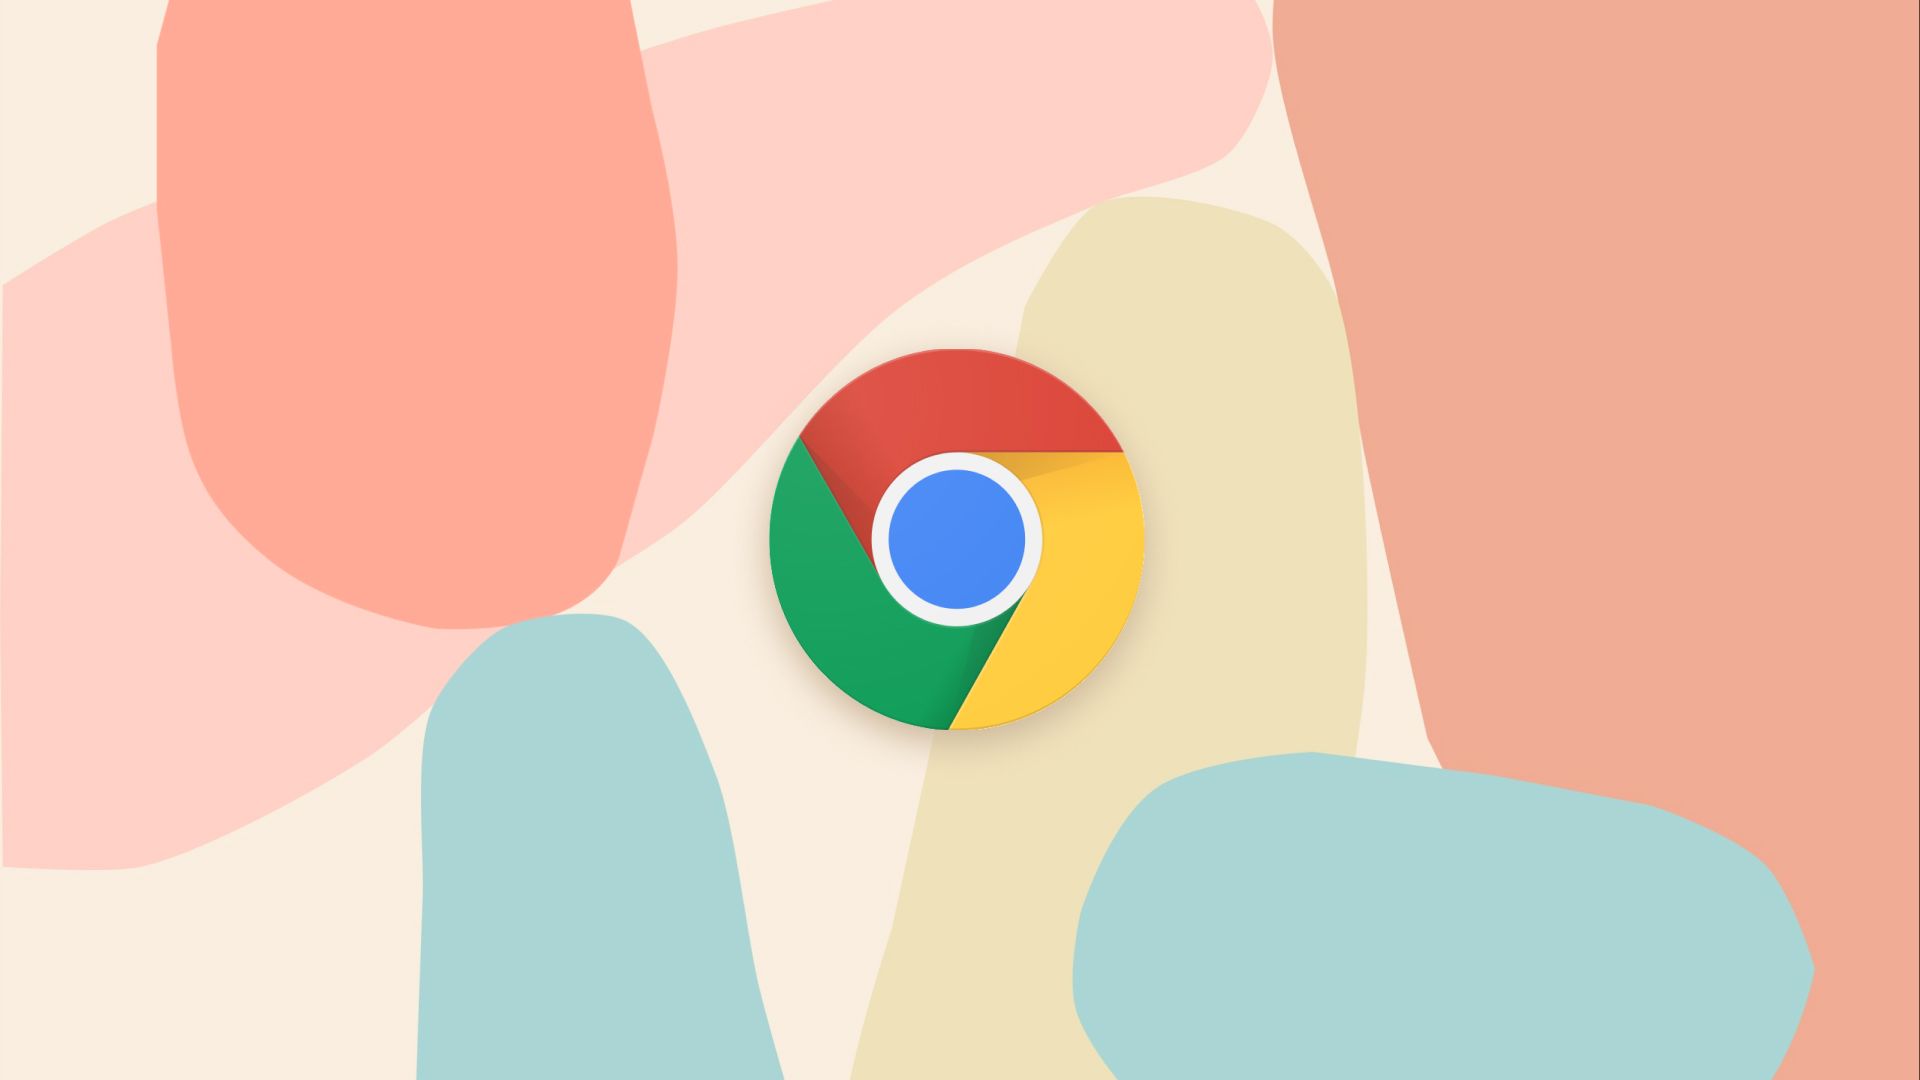 Chrome 114 finally has a transparent navigation bar on Android | Flipboard